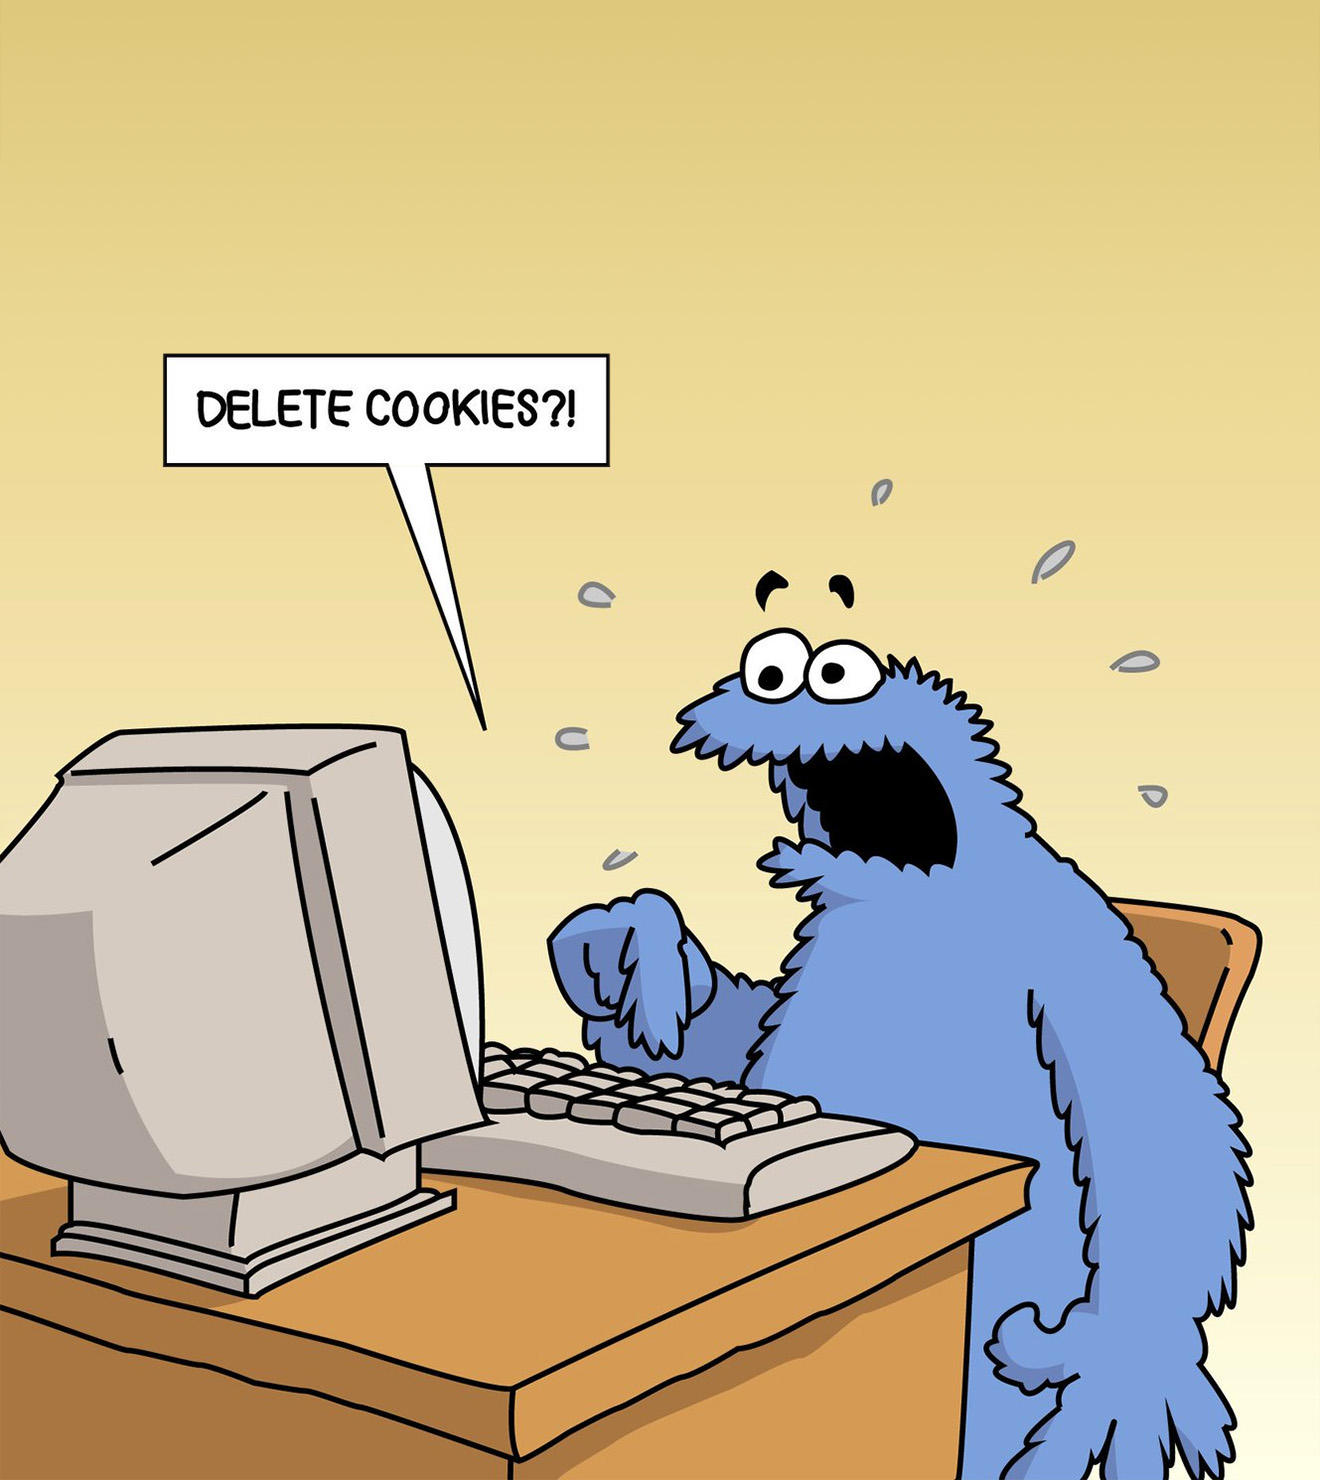 A Cartoon of Cookie Monster expressing despair at the proposition of deleting cookies.